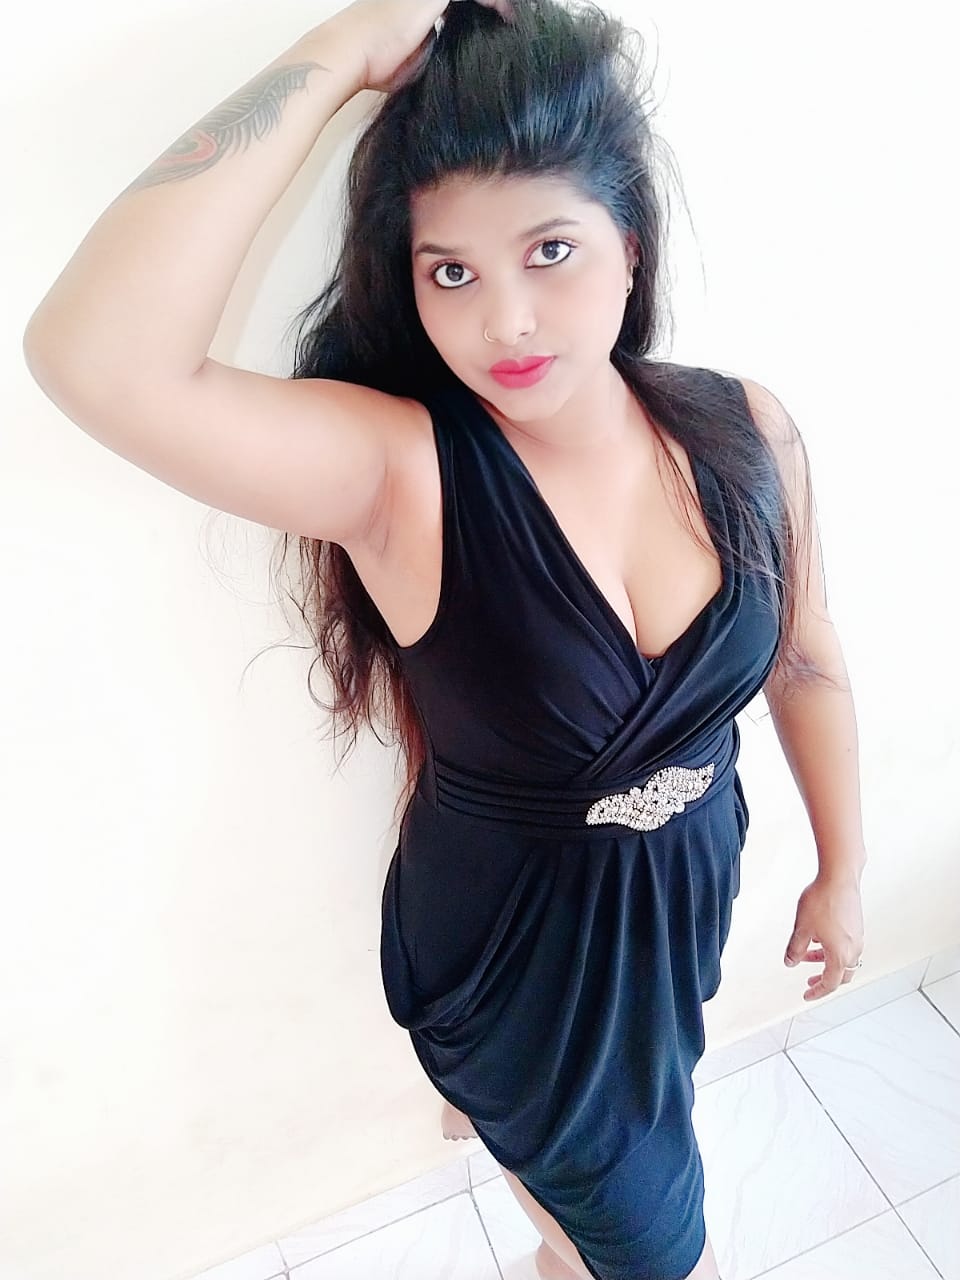 % GENUINE Chandigarh CALL GIRL SERVICE IN HOUR AVAILABLE SERVICE